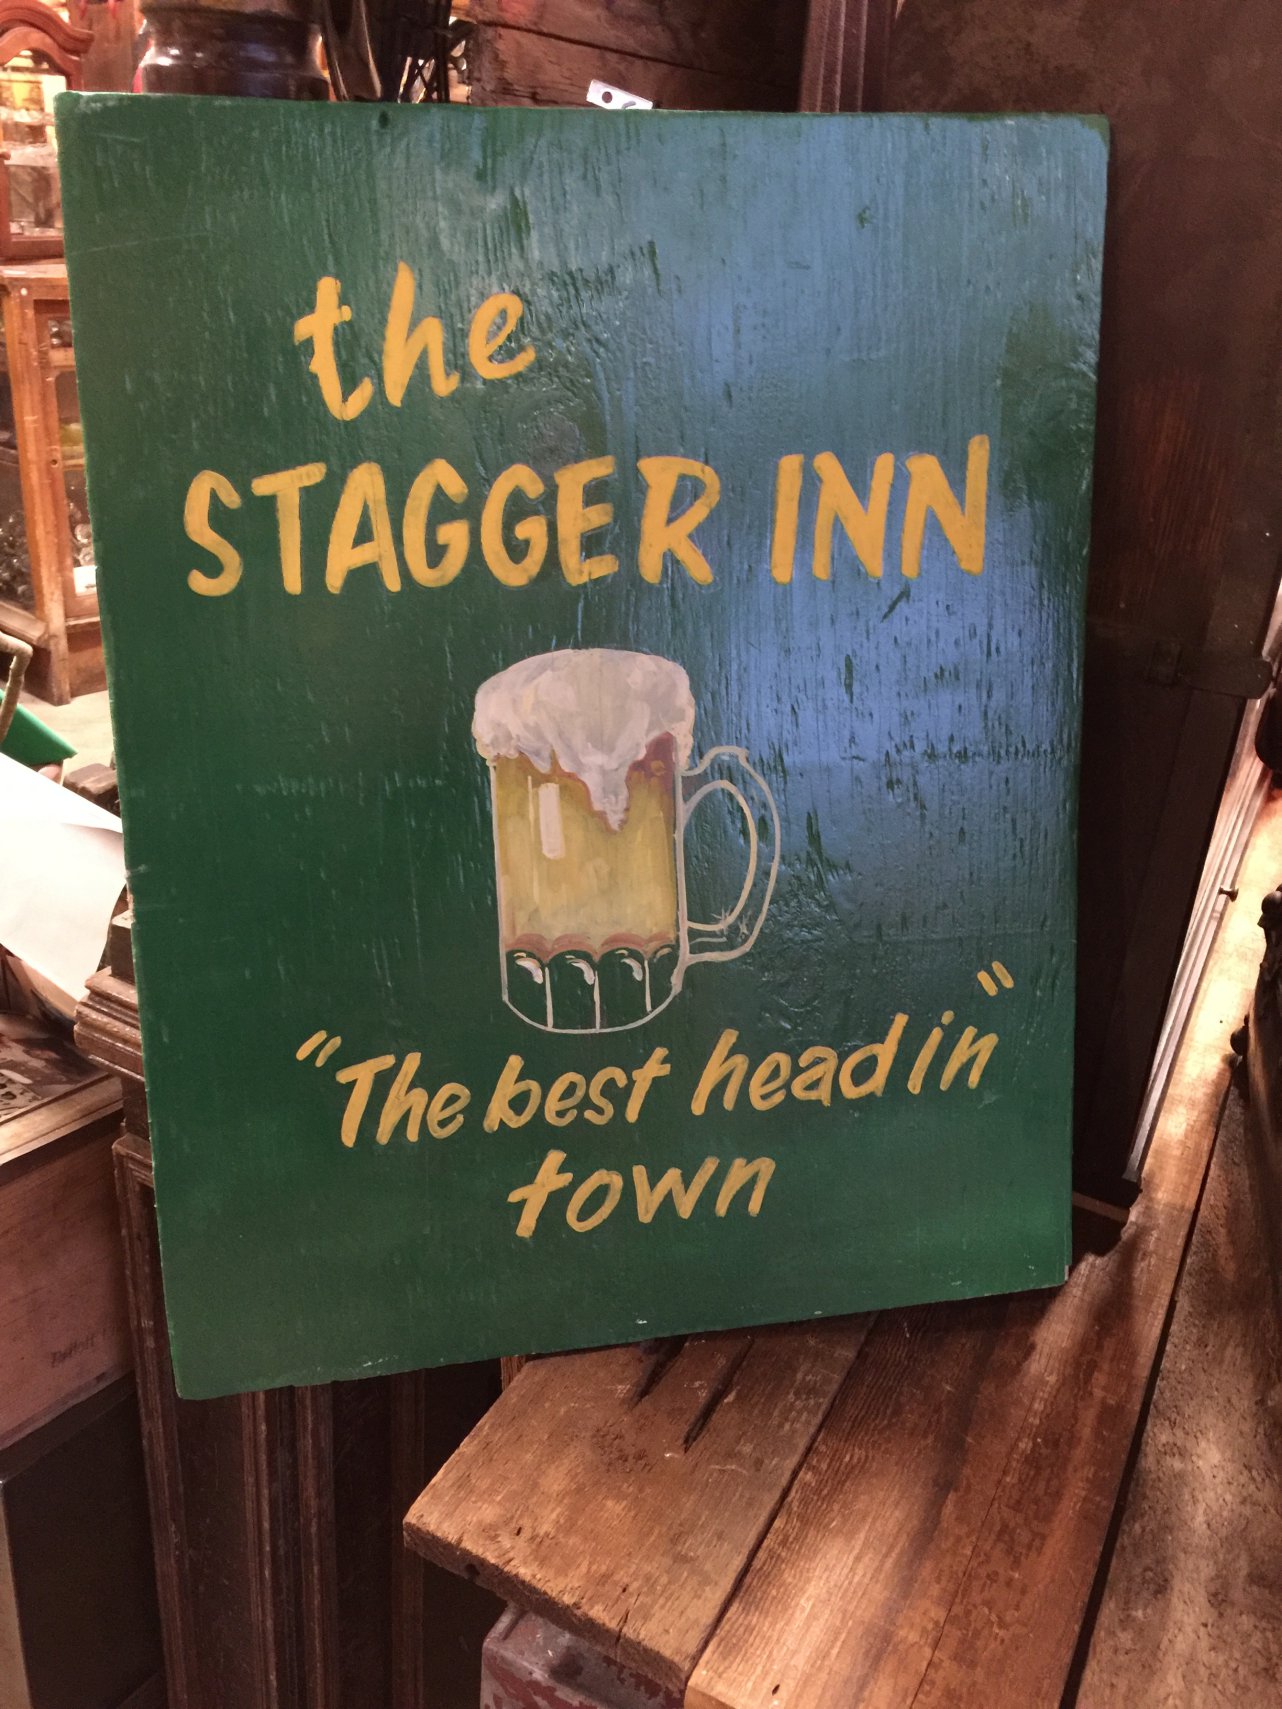 thrift store wood - the Stagger Inn ids "The best headin town